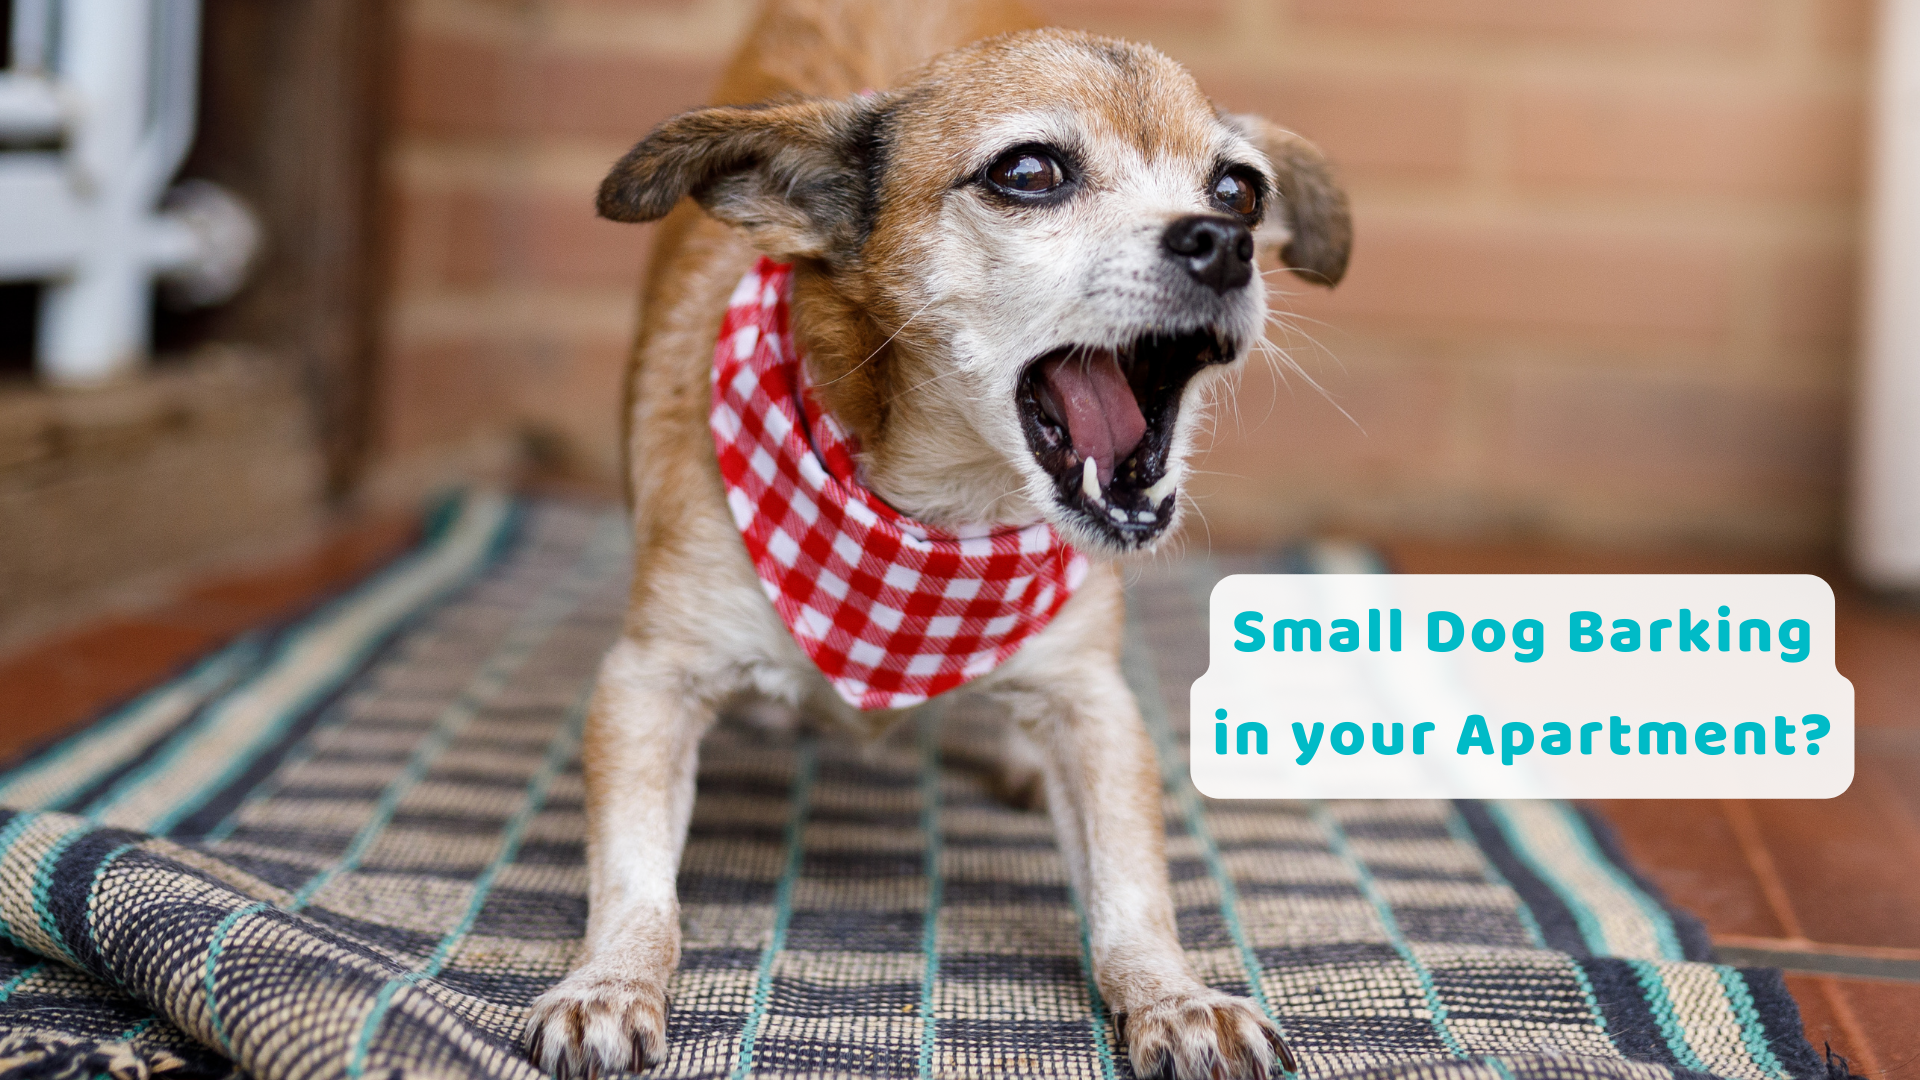 Reduce Dog Barking in Apartments: Explore the Gentle Technology Behind Maxbarks